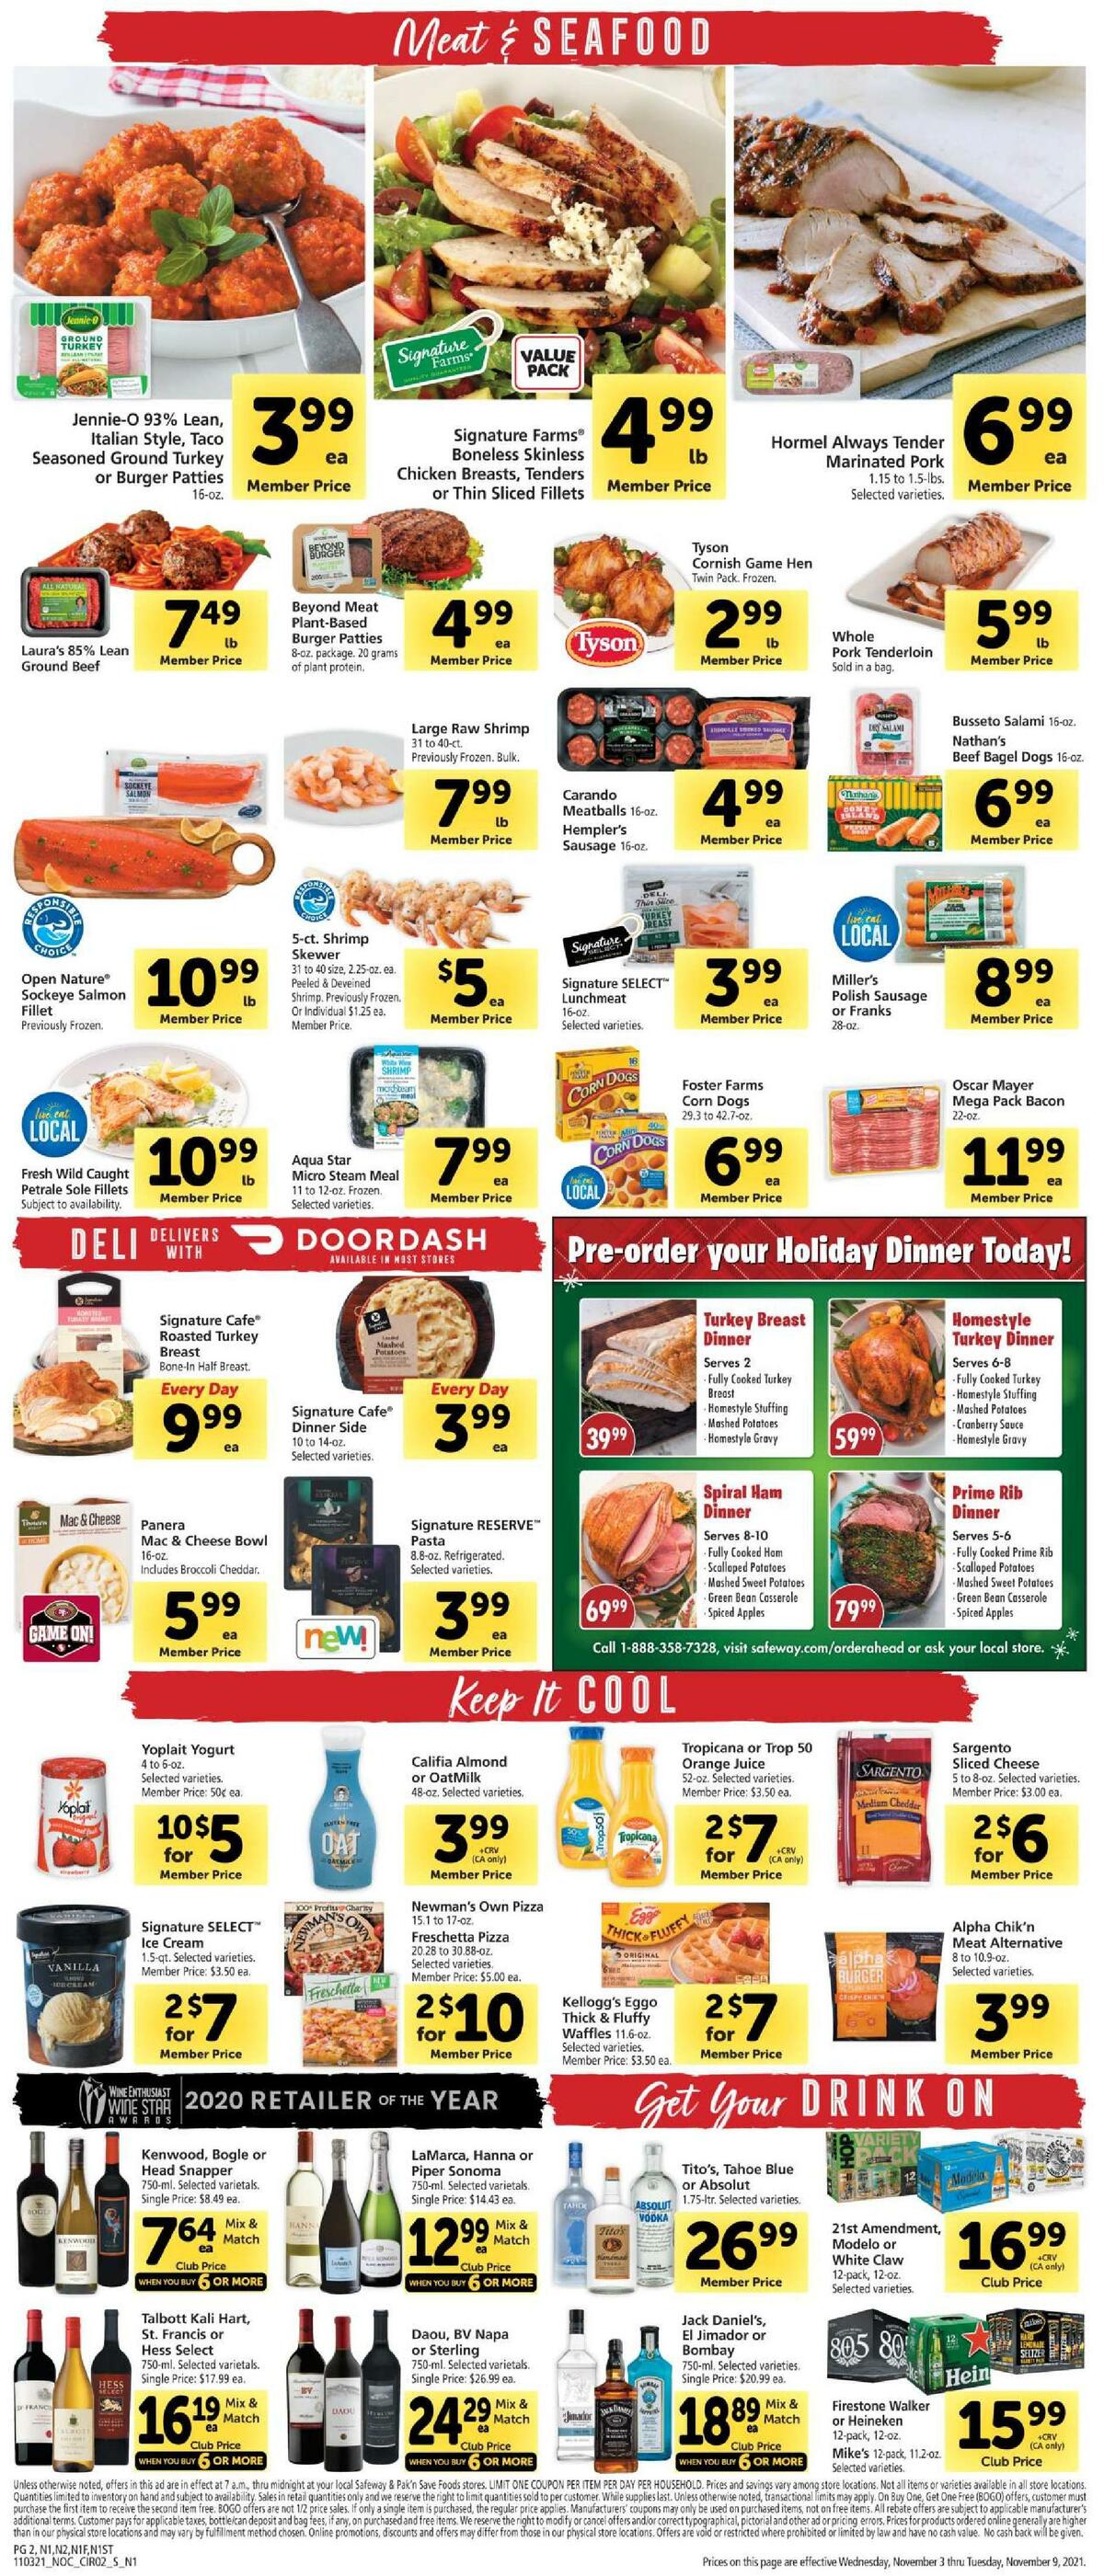 Safeway Weekly Ad from November 3